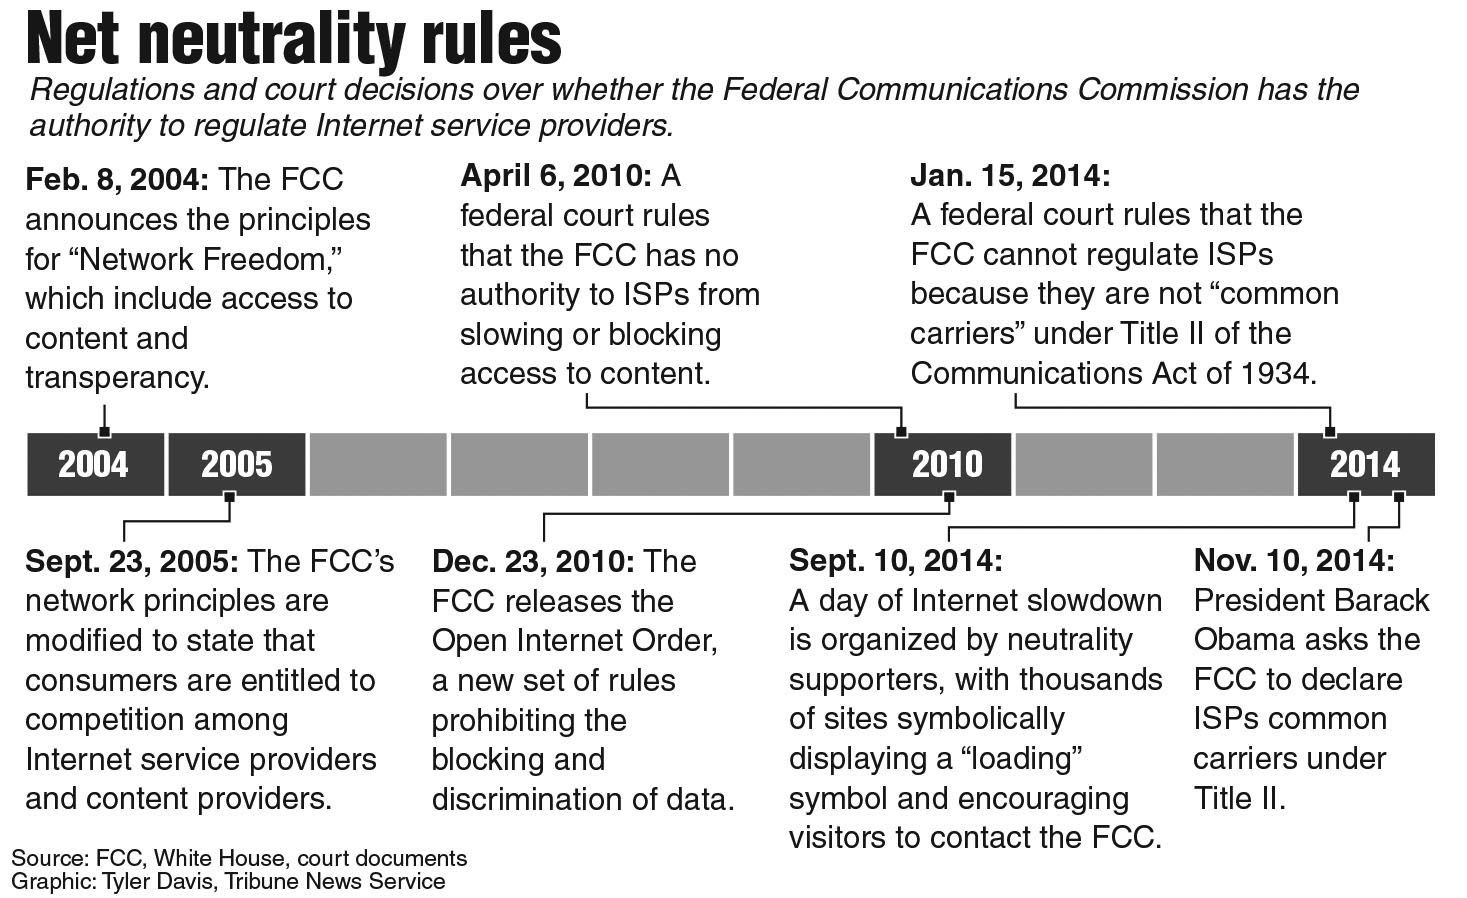 Timeline of rules and court decisions on net neutrality. MCT 2014